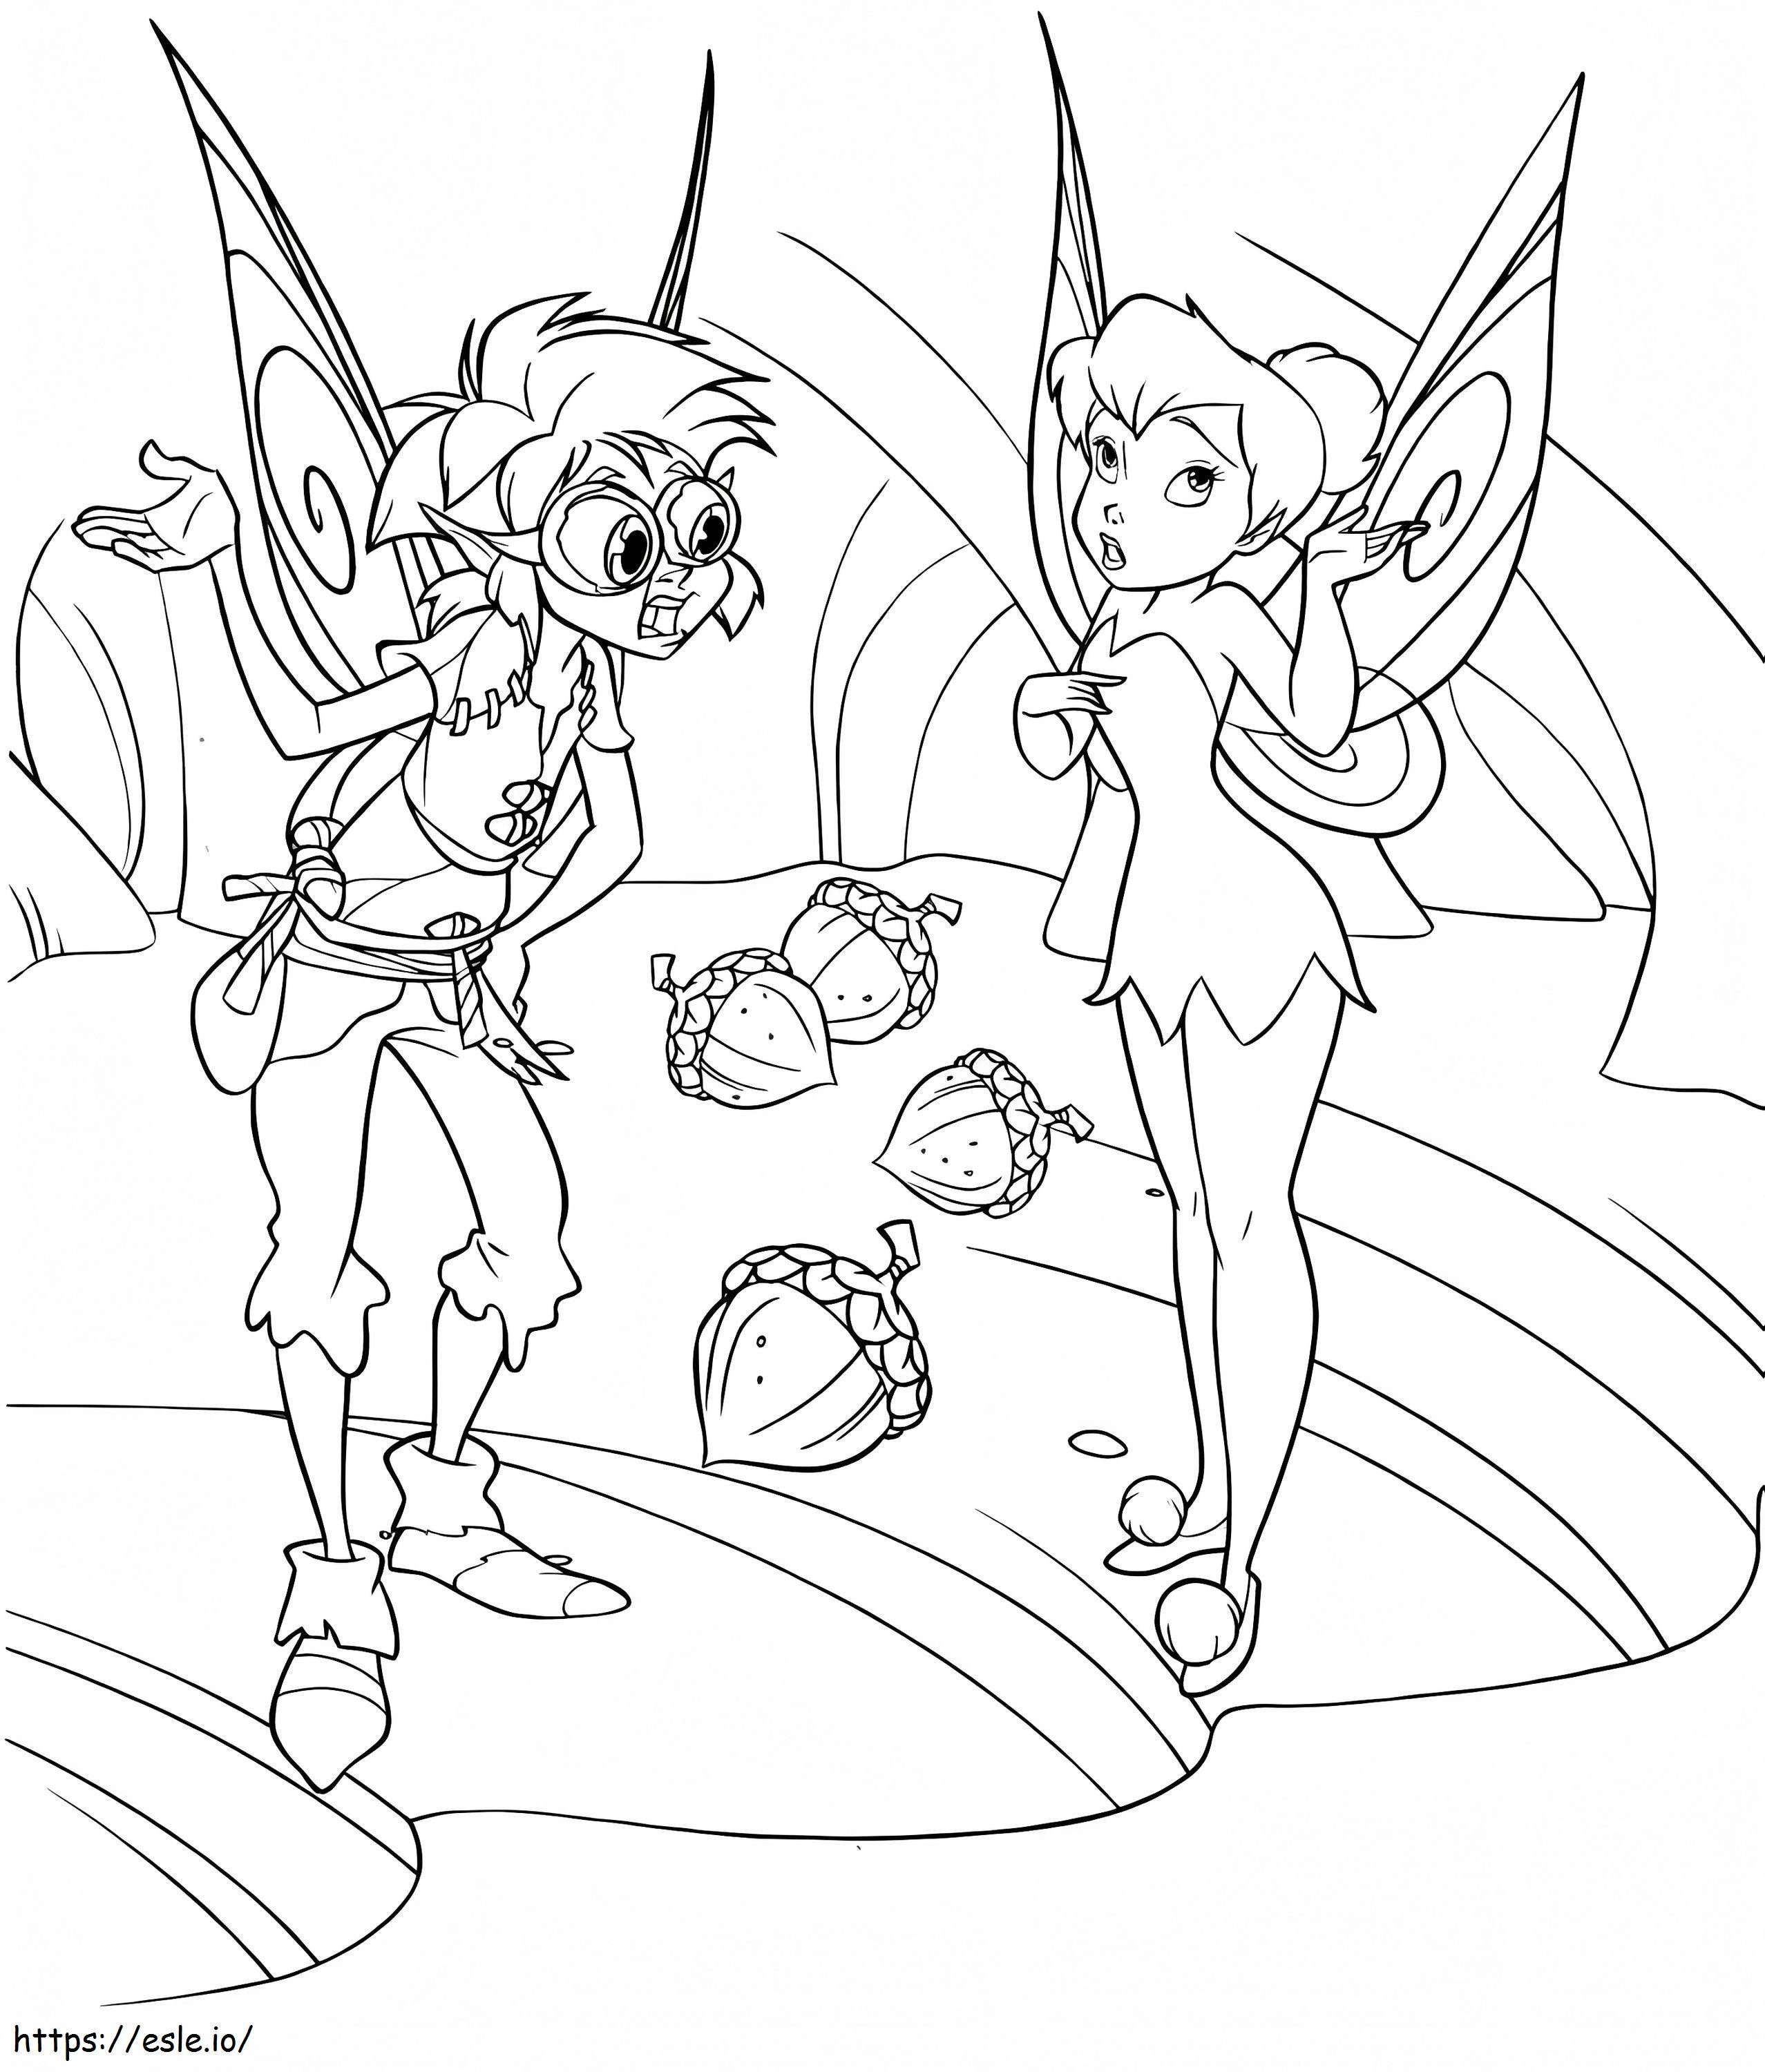 Tinkerbell Talk To A Friend coloring page